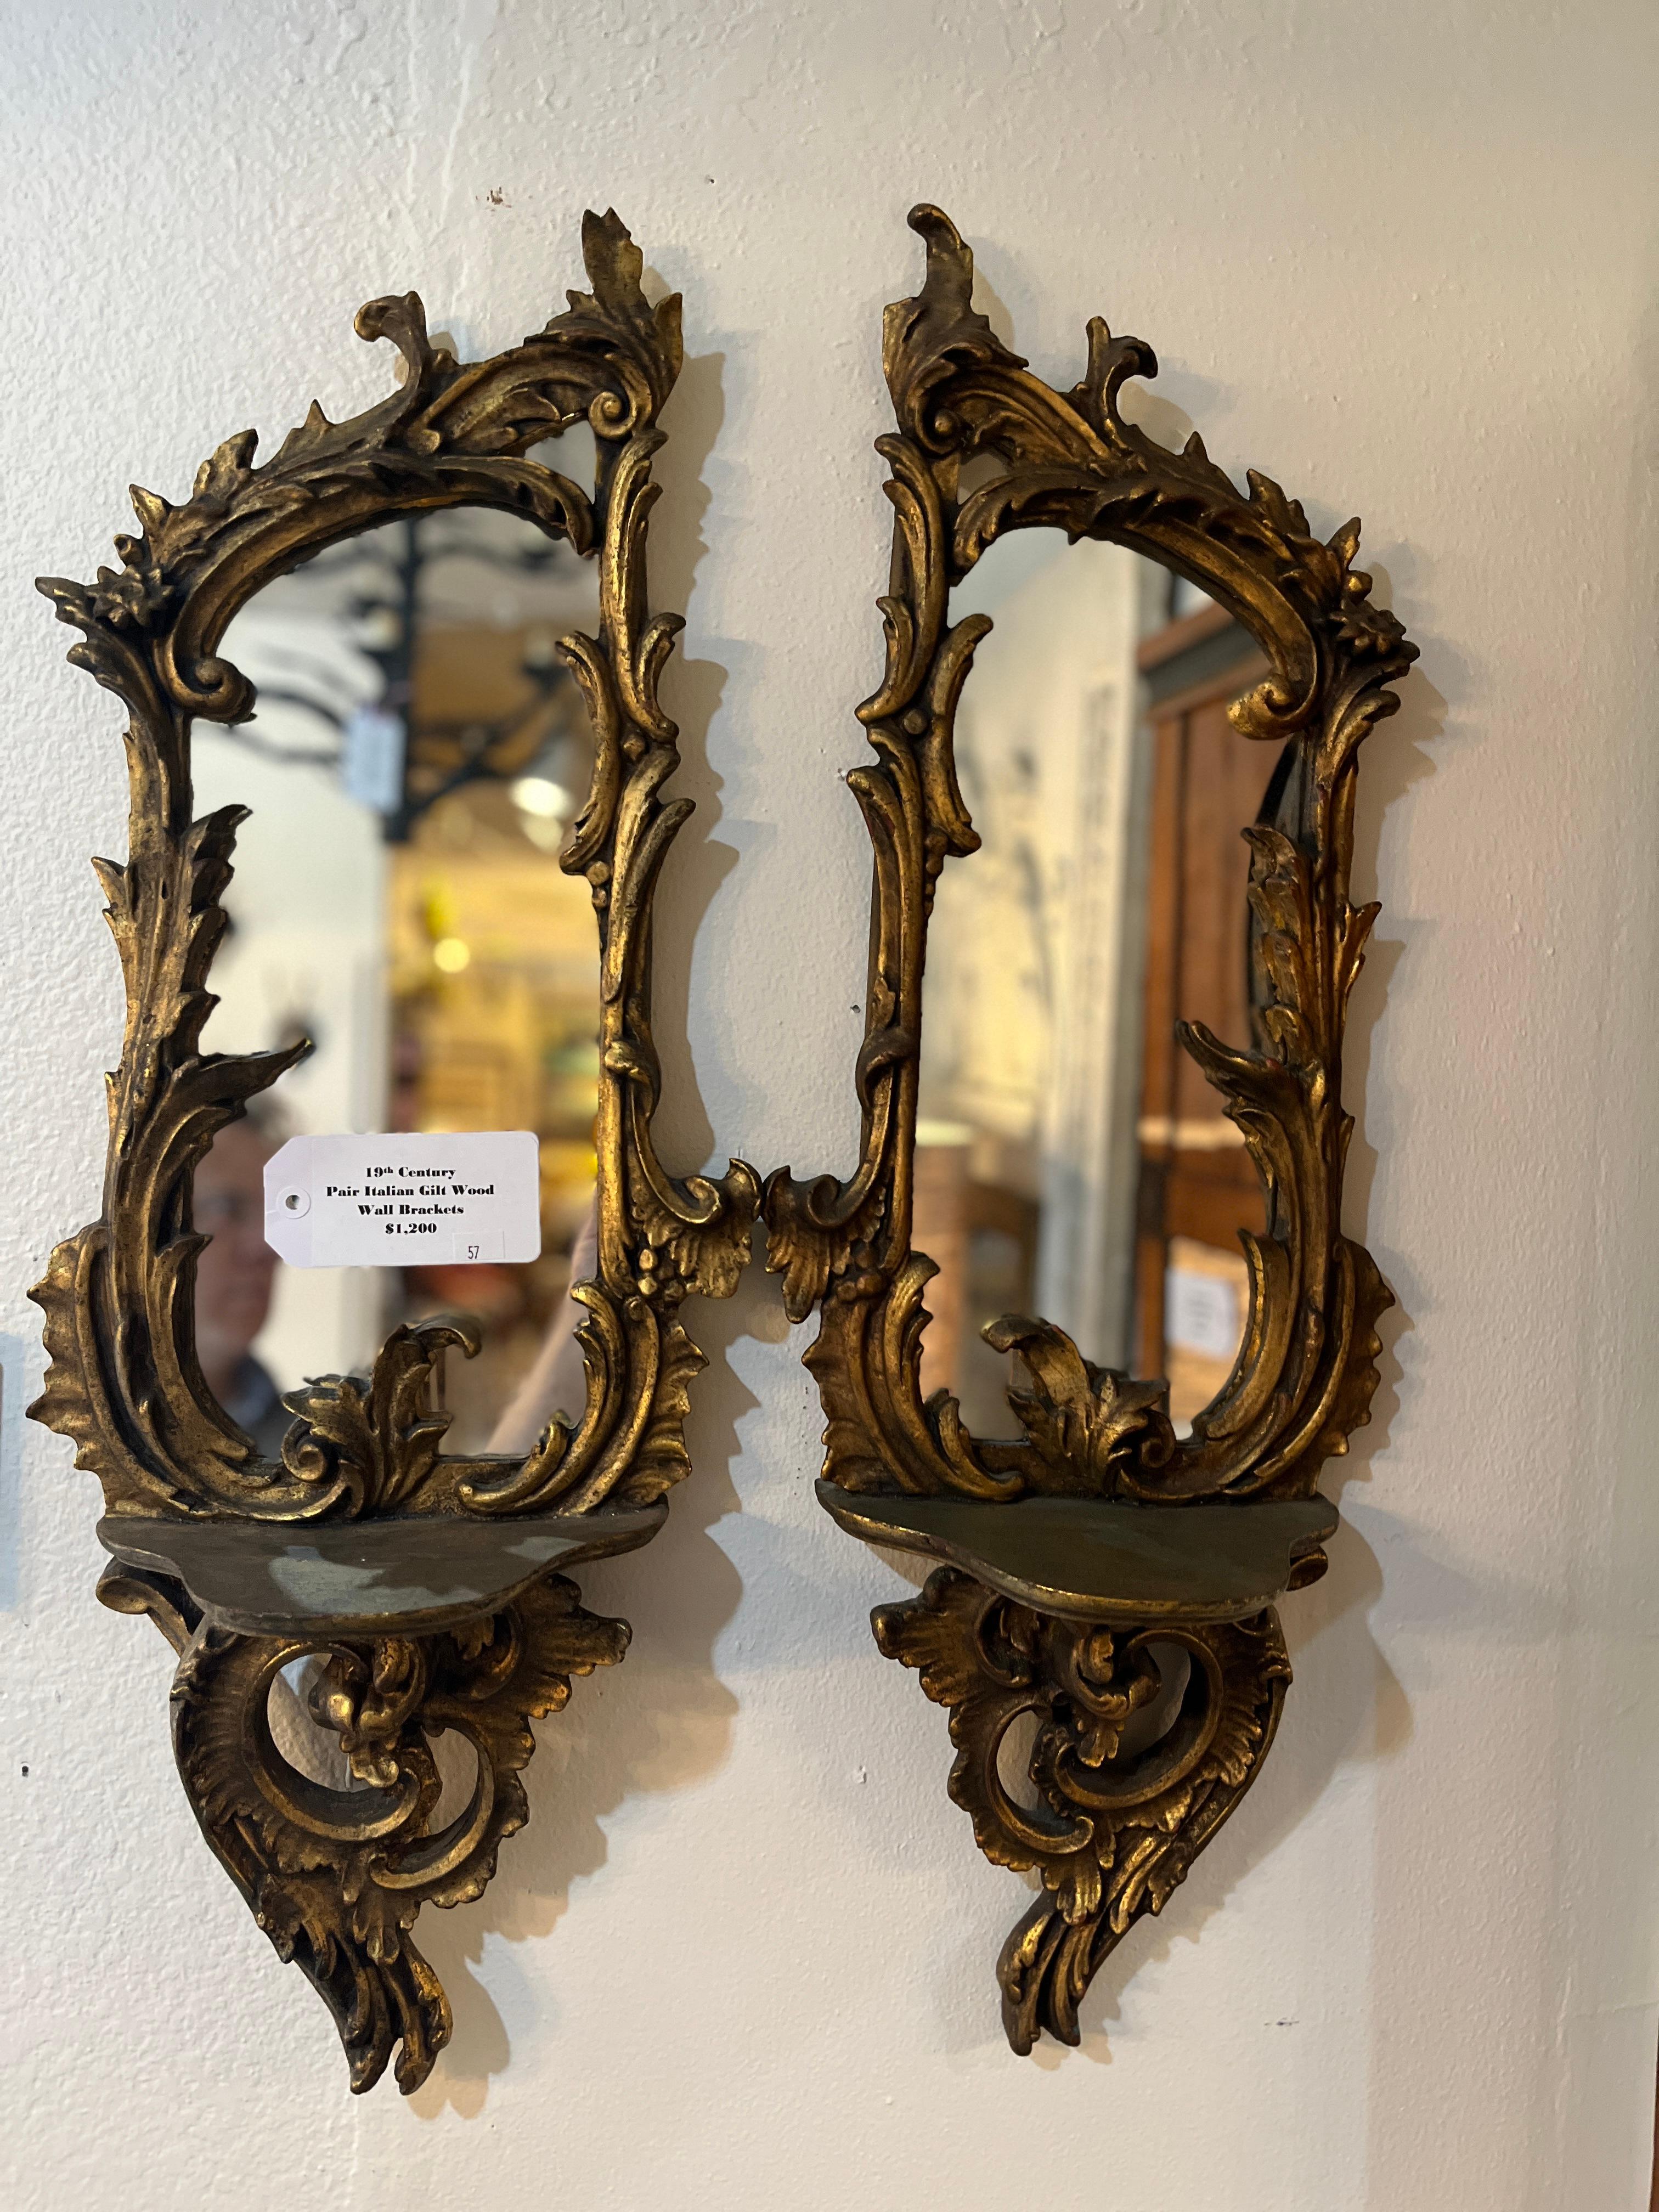 19th Century Italian Gilt Wood Wall Brackets.  Age appropriate wear. Quite a bit of character for this style of wall bracket/ mirror